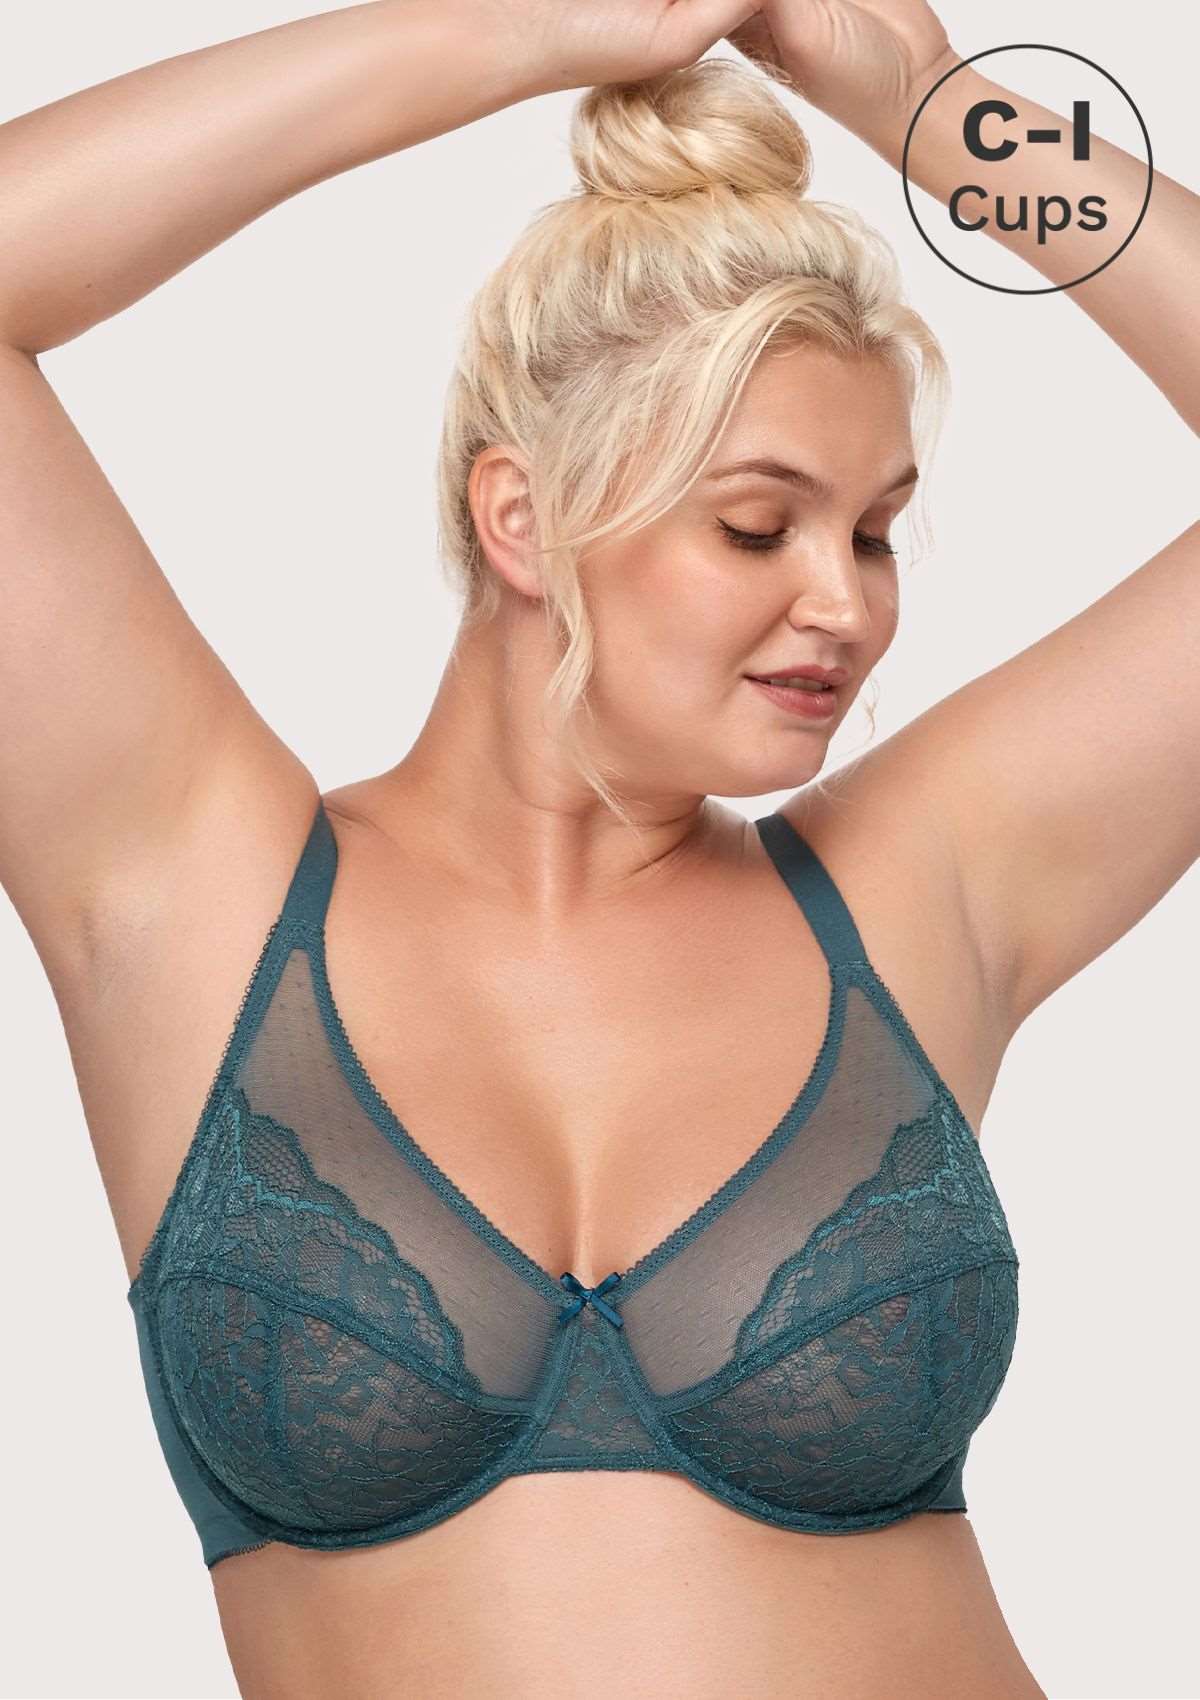 HSIA Enchante Full Coverage Bra: Supportive Bra For Big Busts - Balsam Blue / 34 / C